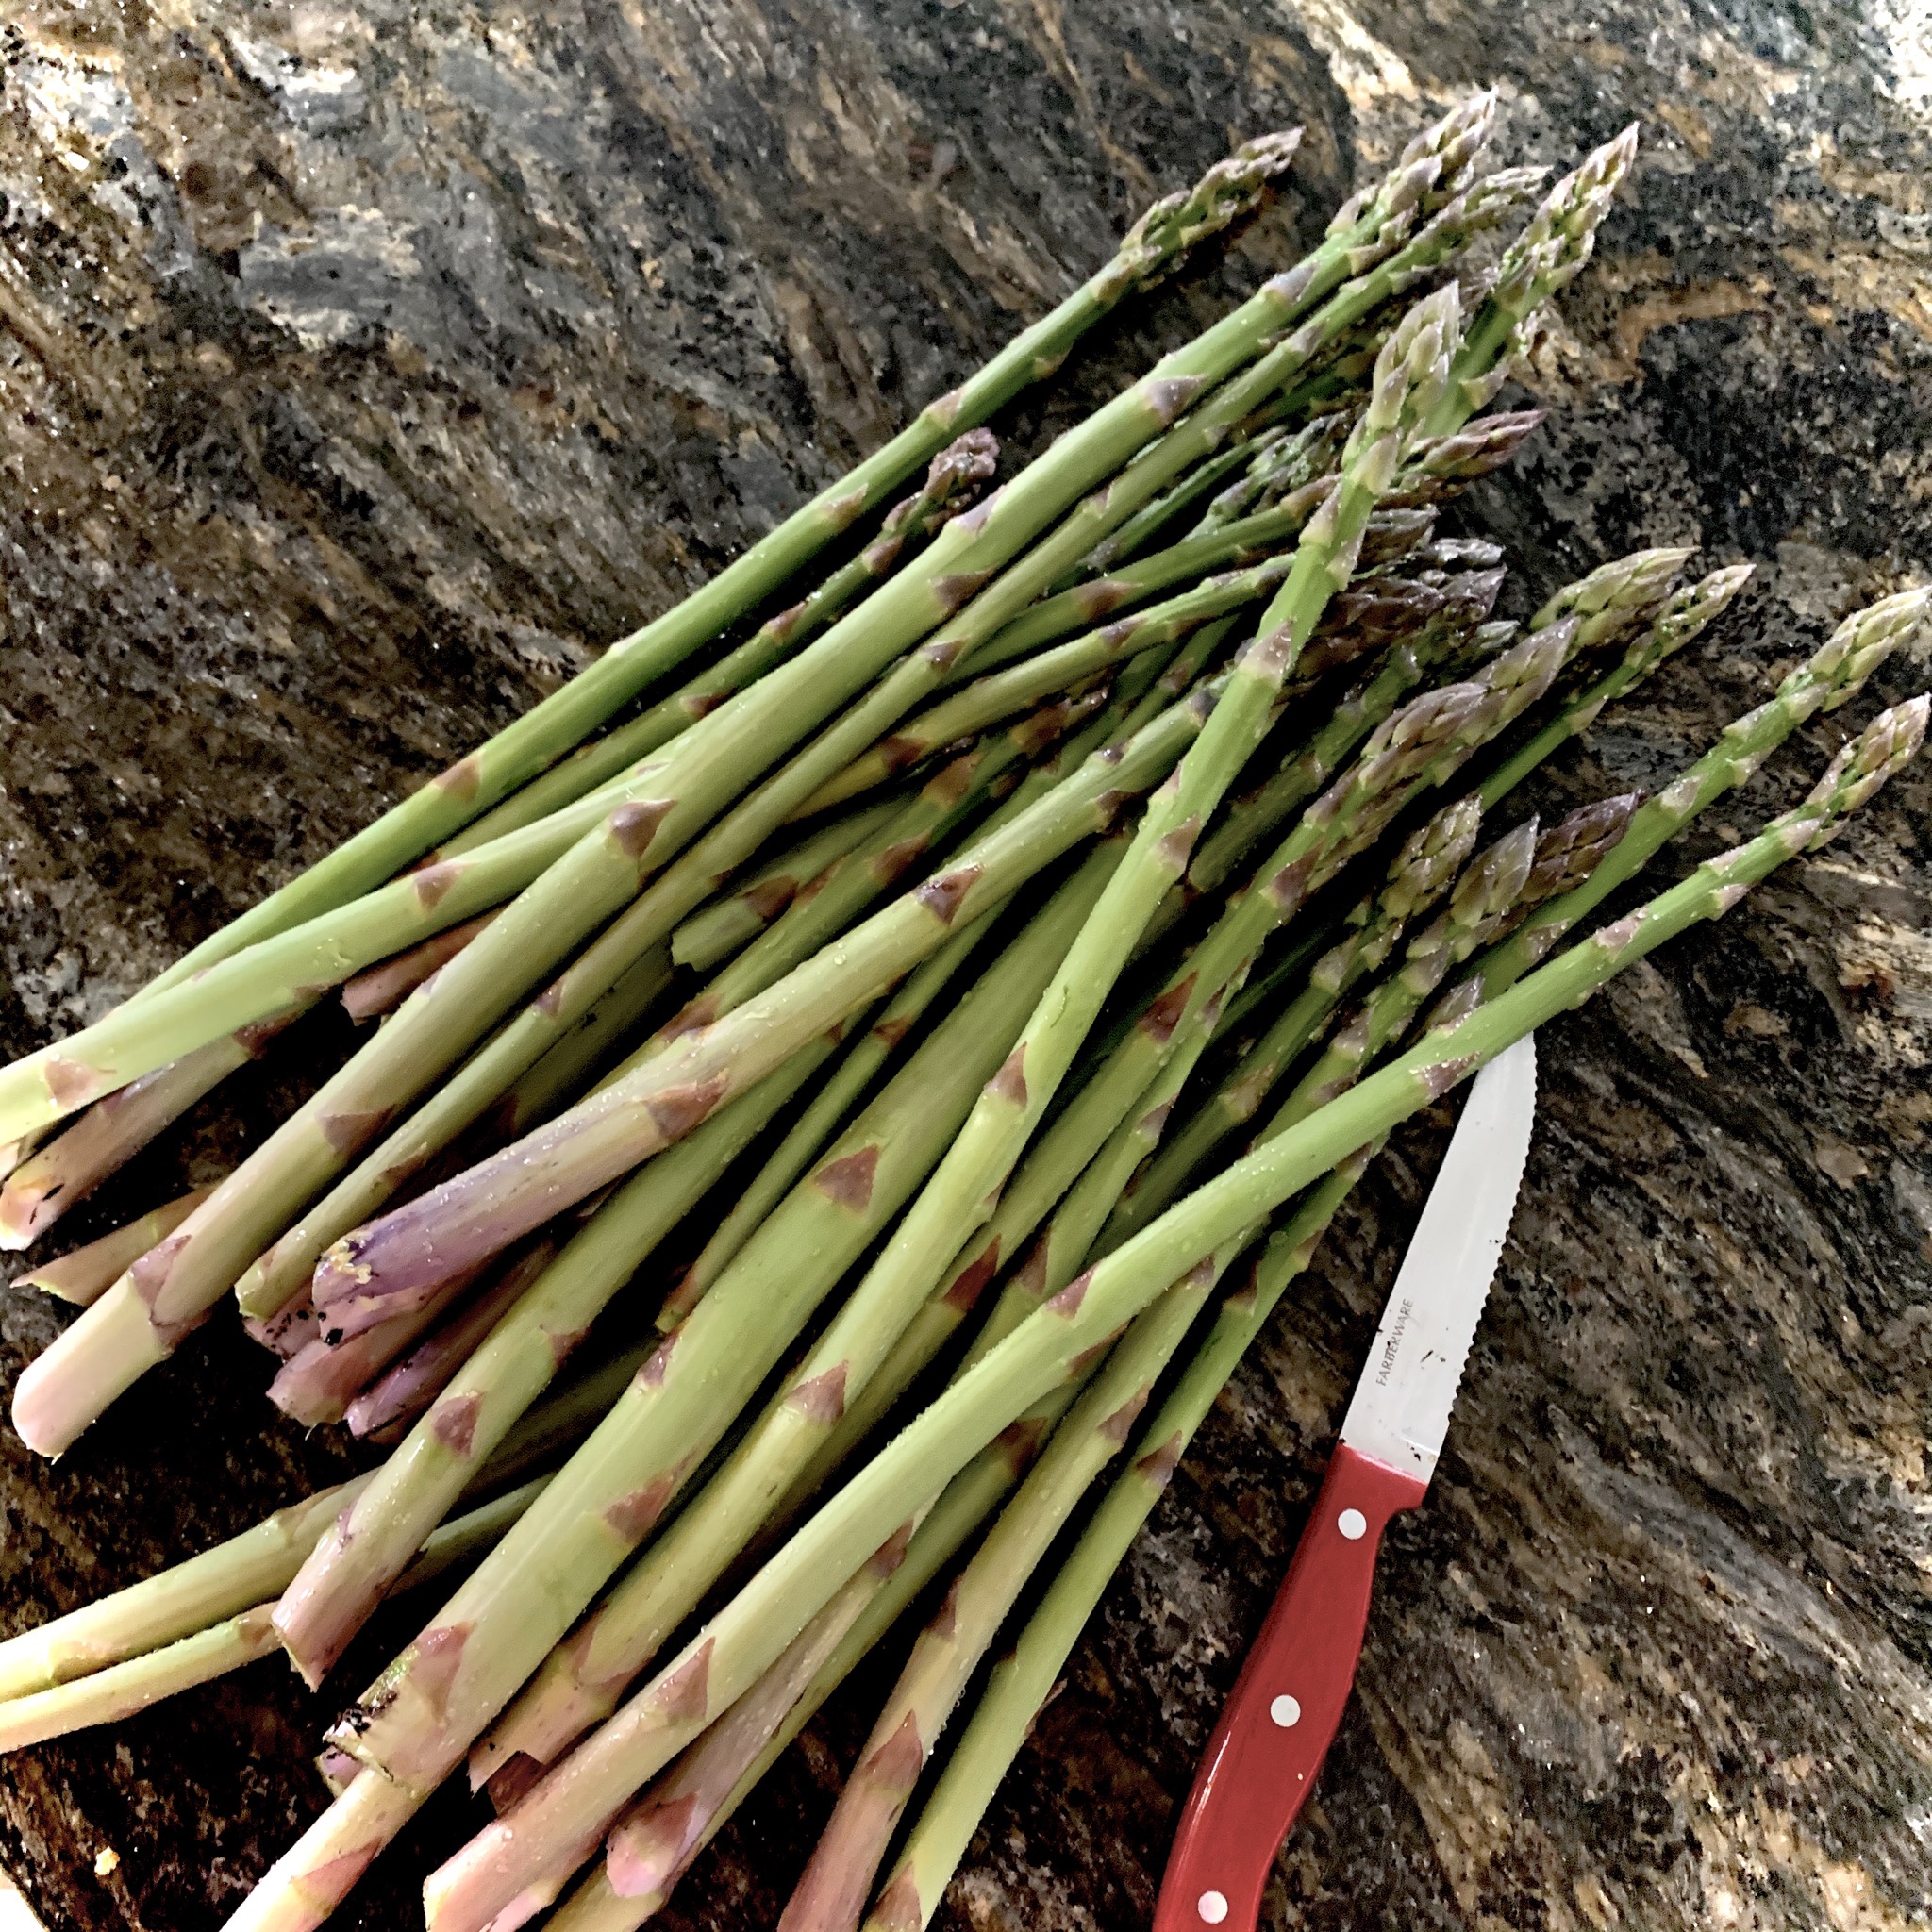 14CC218C BCE1 44F3 8466 343AD0A76273 How to double or triple your asparagus yield